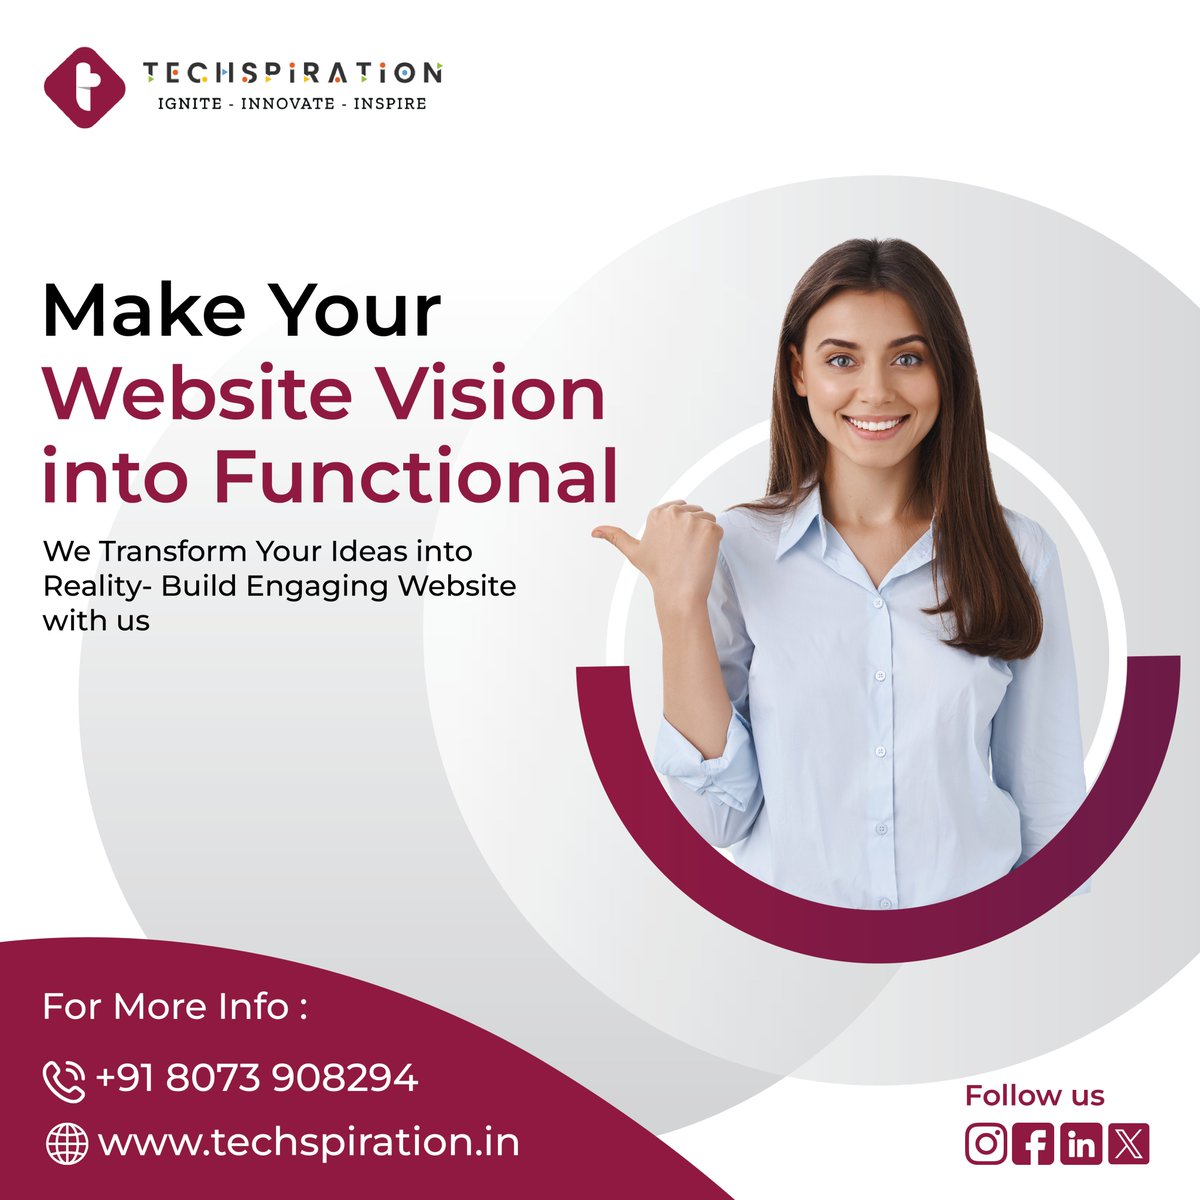 Ready to see your website vision come to life? Get in touch with us today and let's build something amazing together!#entrepreneur #entrepreneurlife #entrepreneurs #entrepreneurship #websitedesign #websitebuilder #websitedesigner #websitedevelopment #engagingdesigns #techstartups